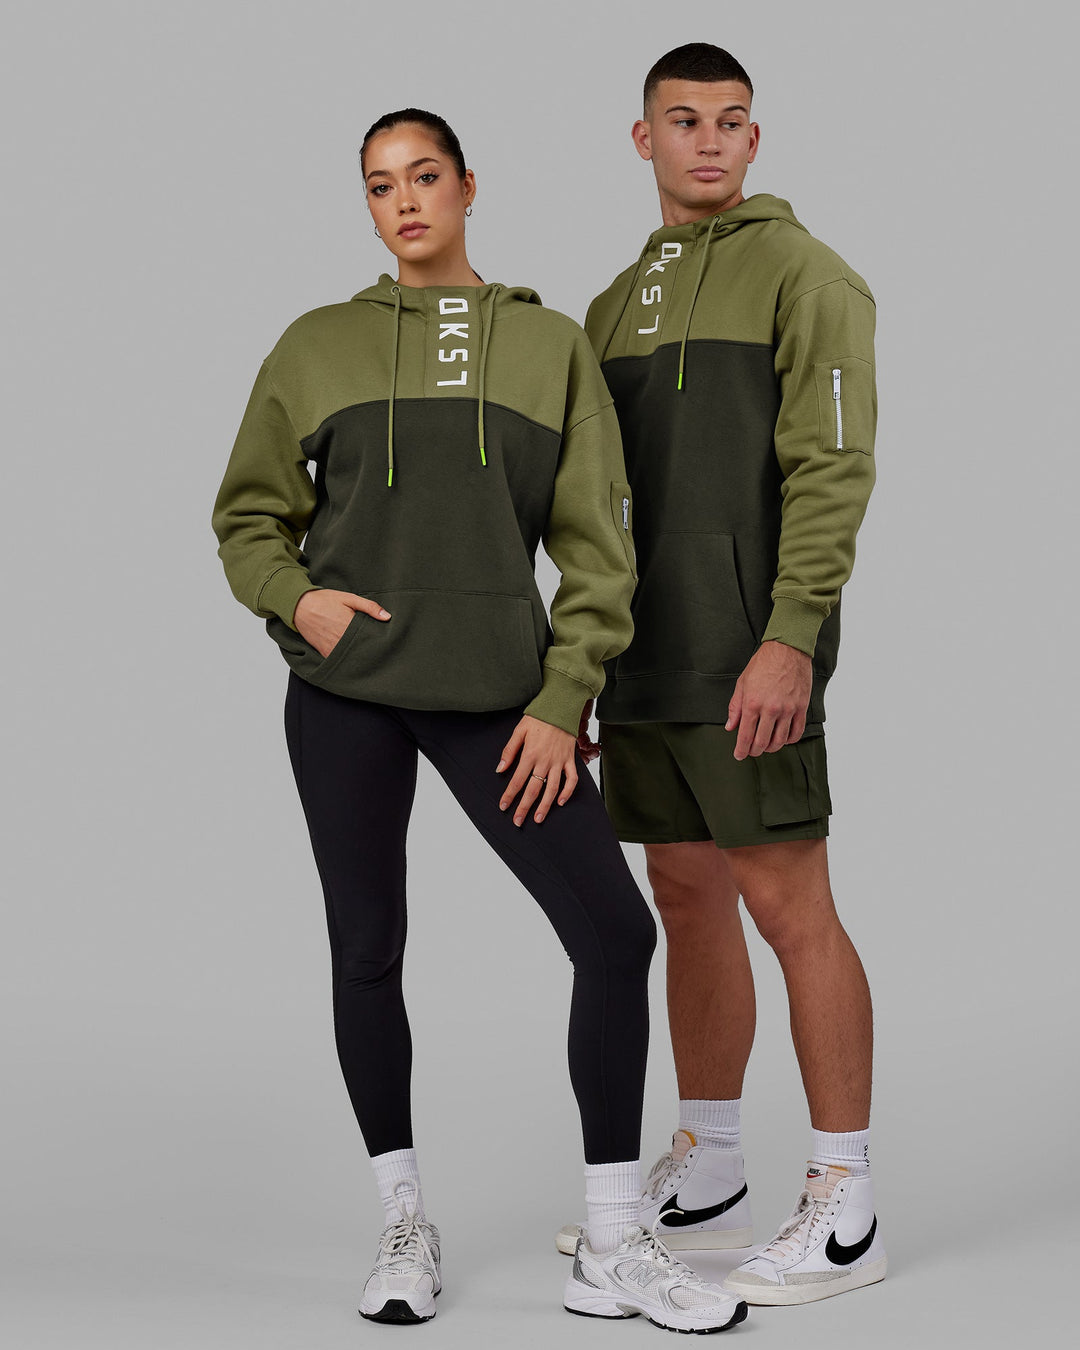 Unisex Contrary Hoodie Oversize - Forest Night-Moss Stone